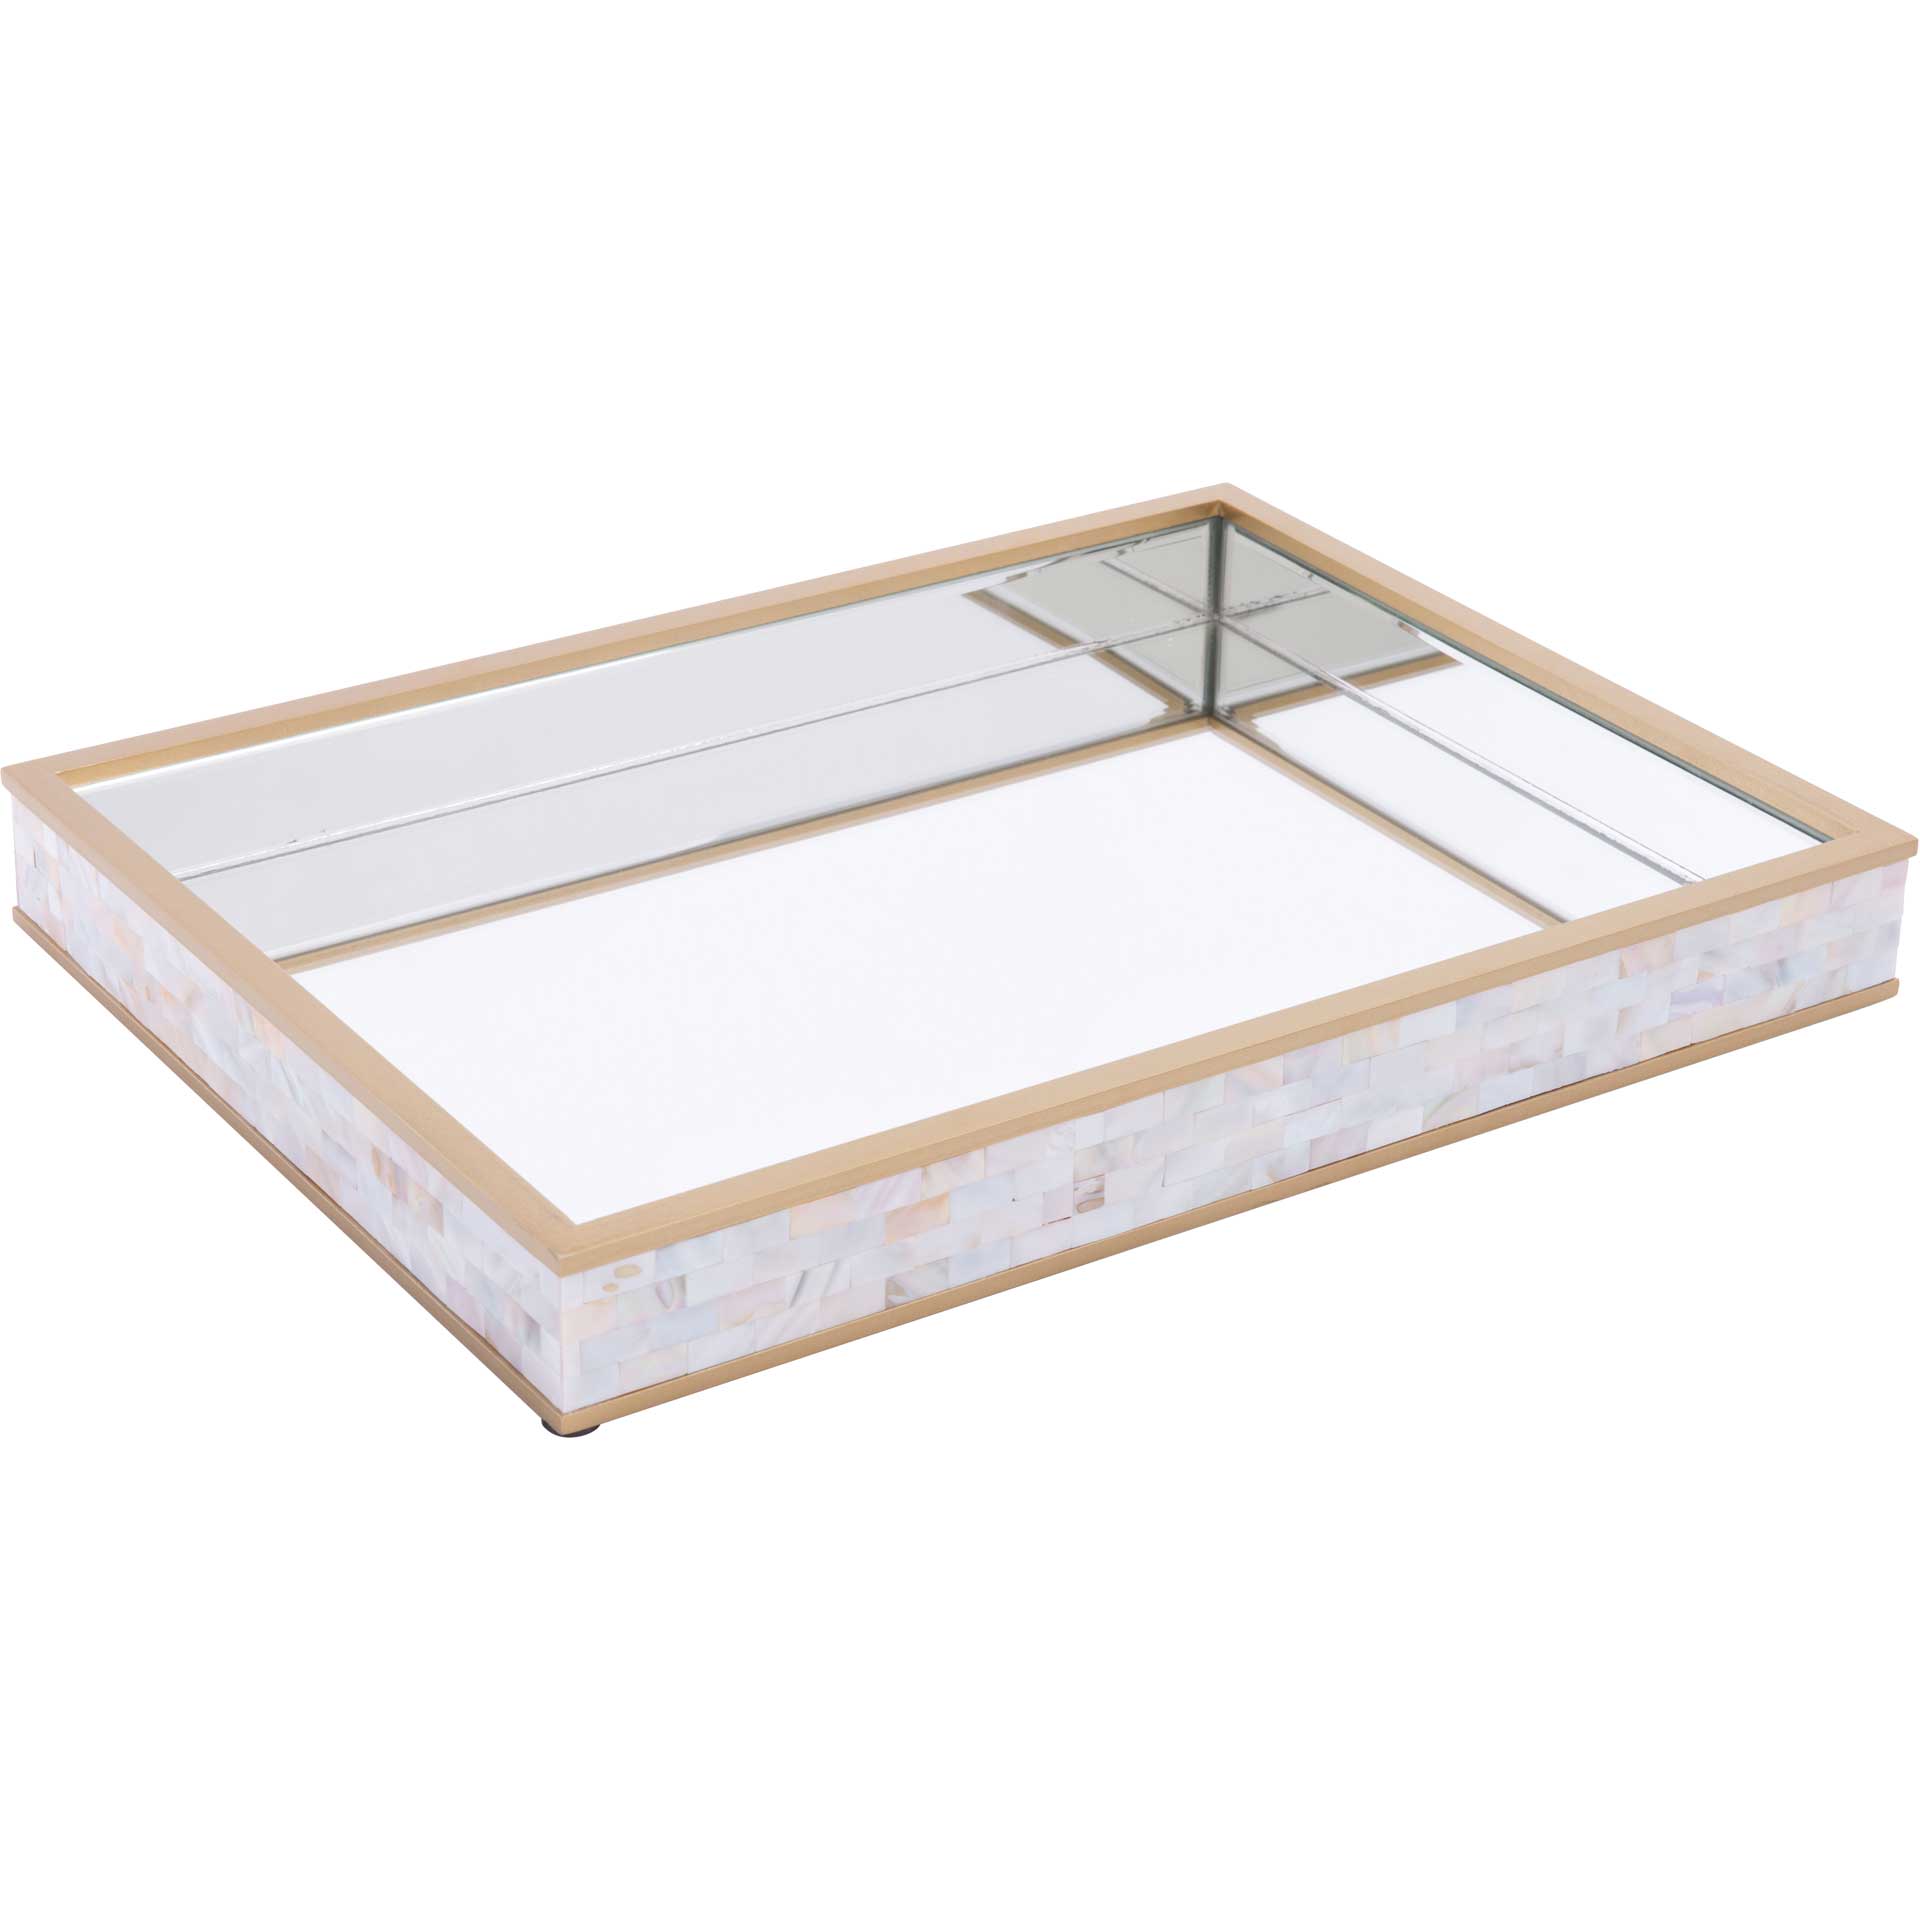 Mother of Pearl Mirror Tray